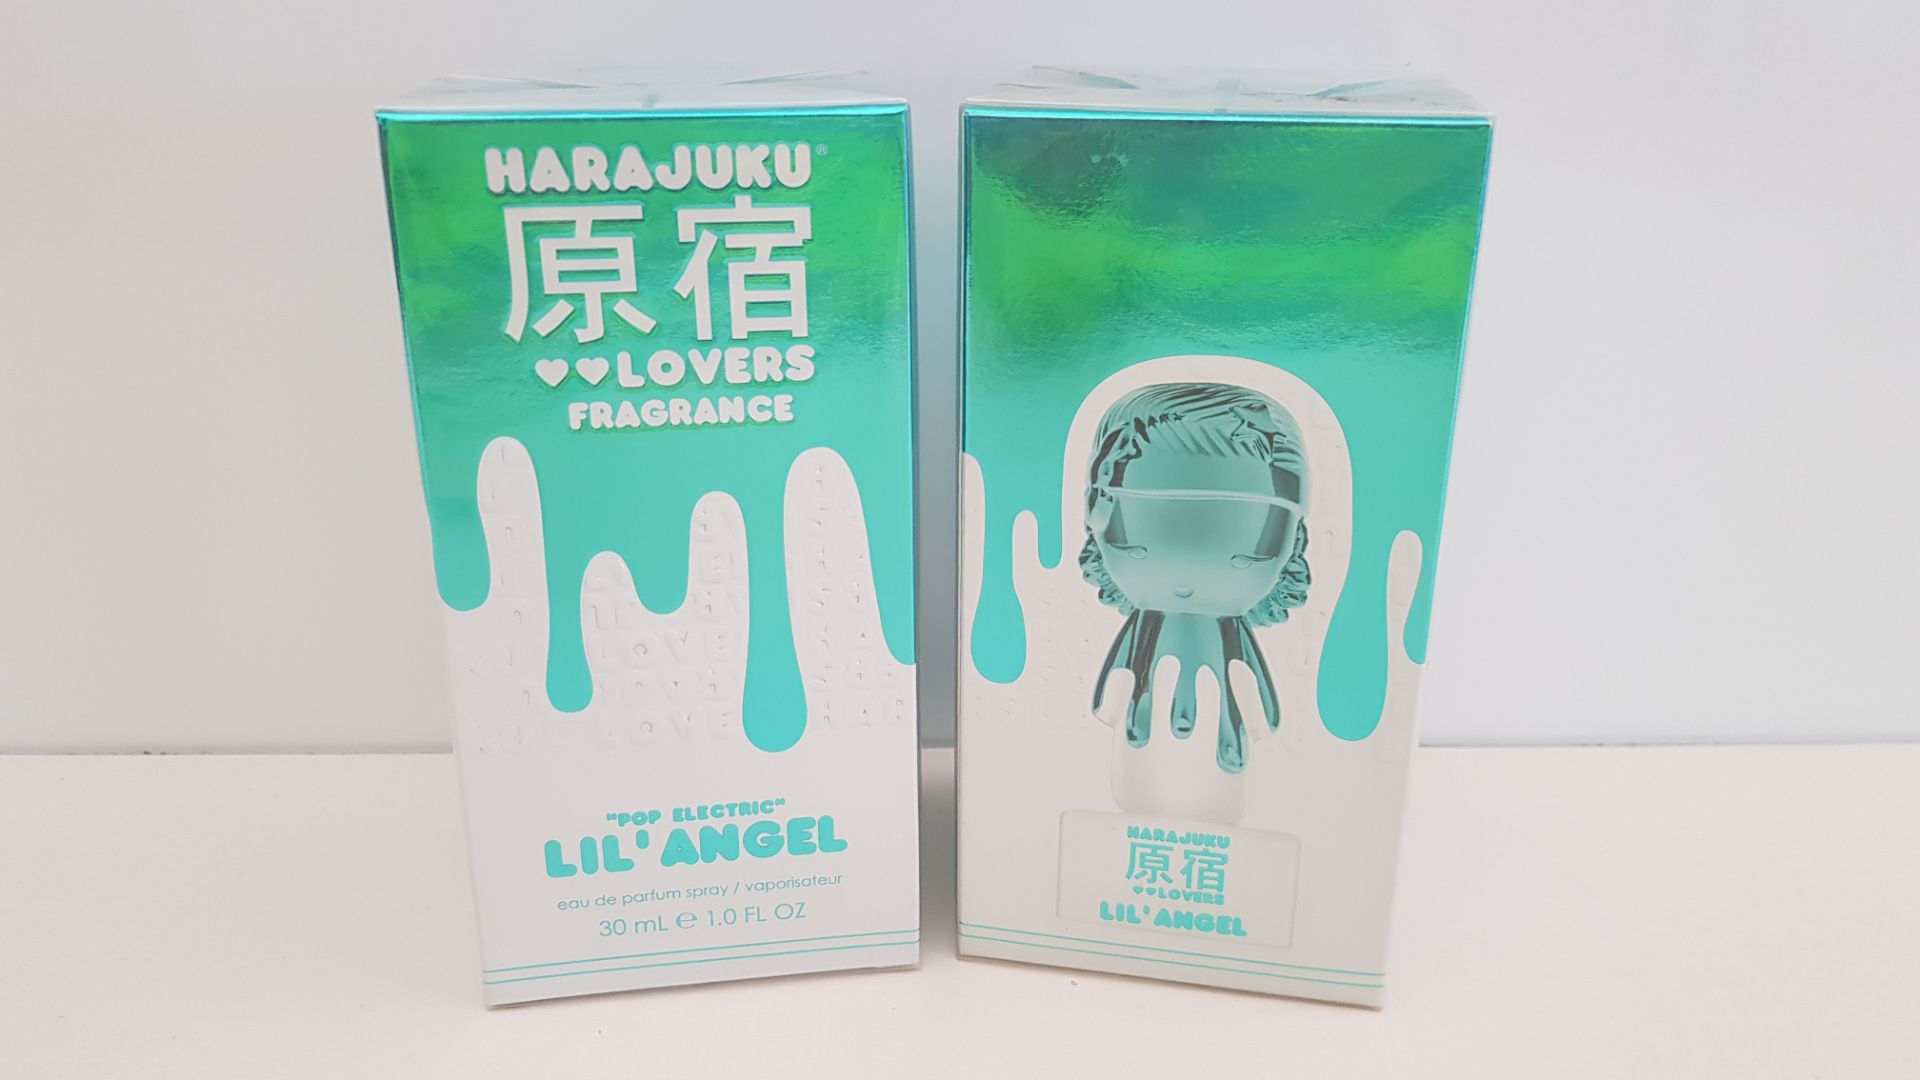 12 X BRAND NEW HARA-JUKU LOVER FRAGRANCE POP ELECTRIC LIL ANGEL (30ML) (PLEASE NOTE SOME BOXES MIGHT